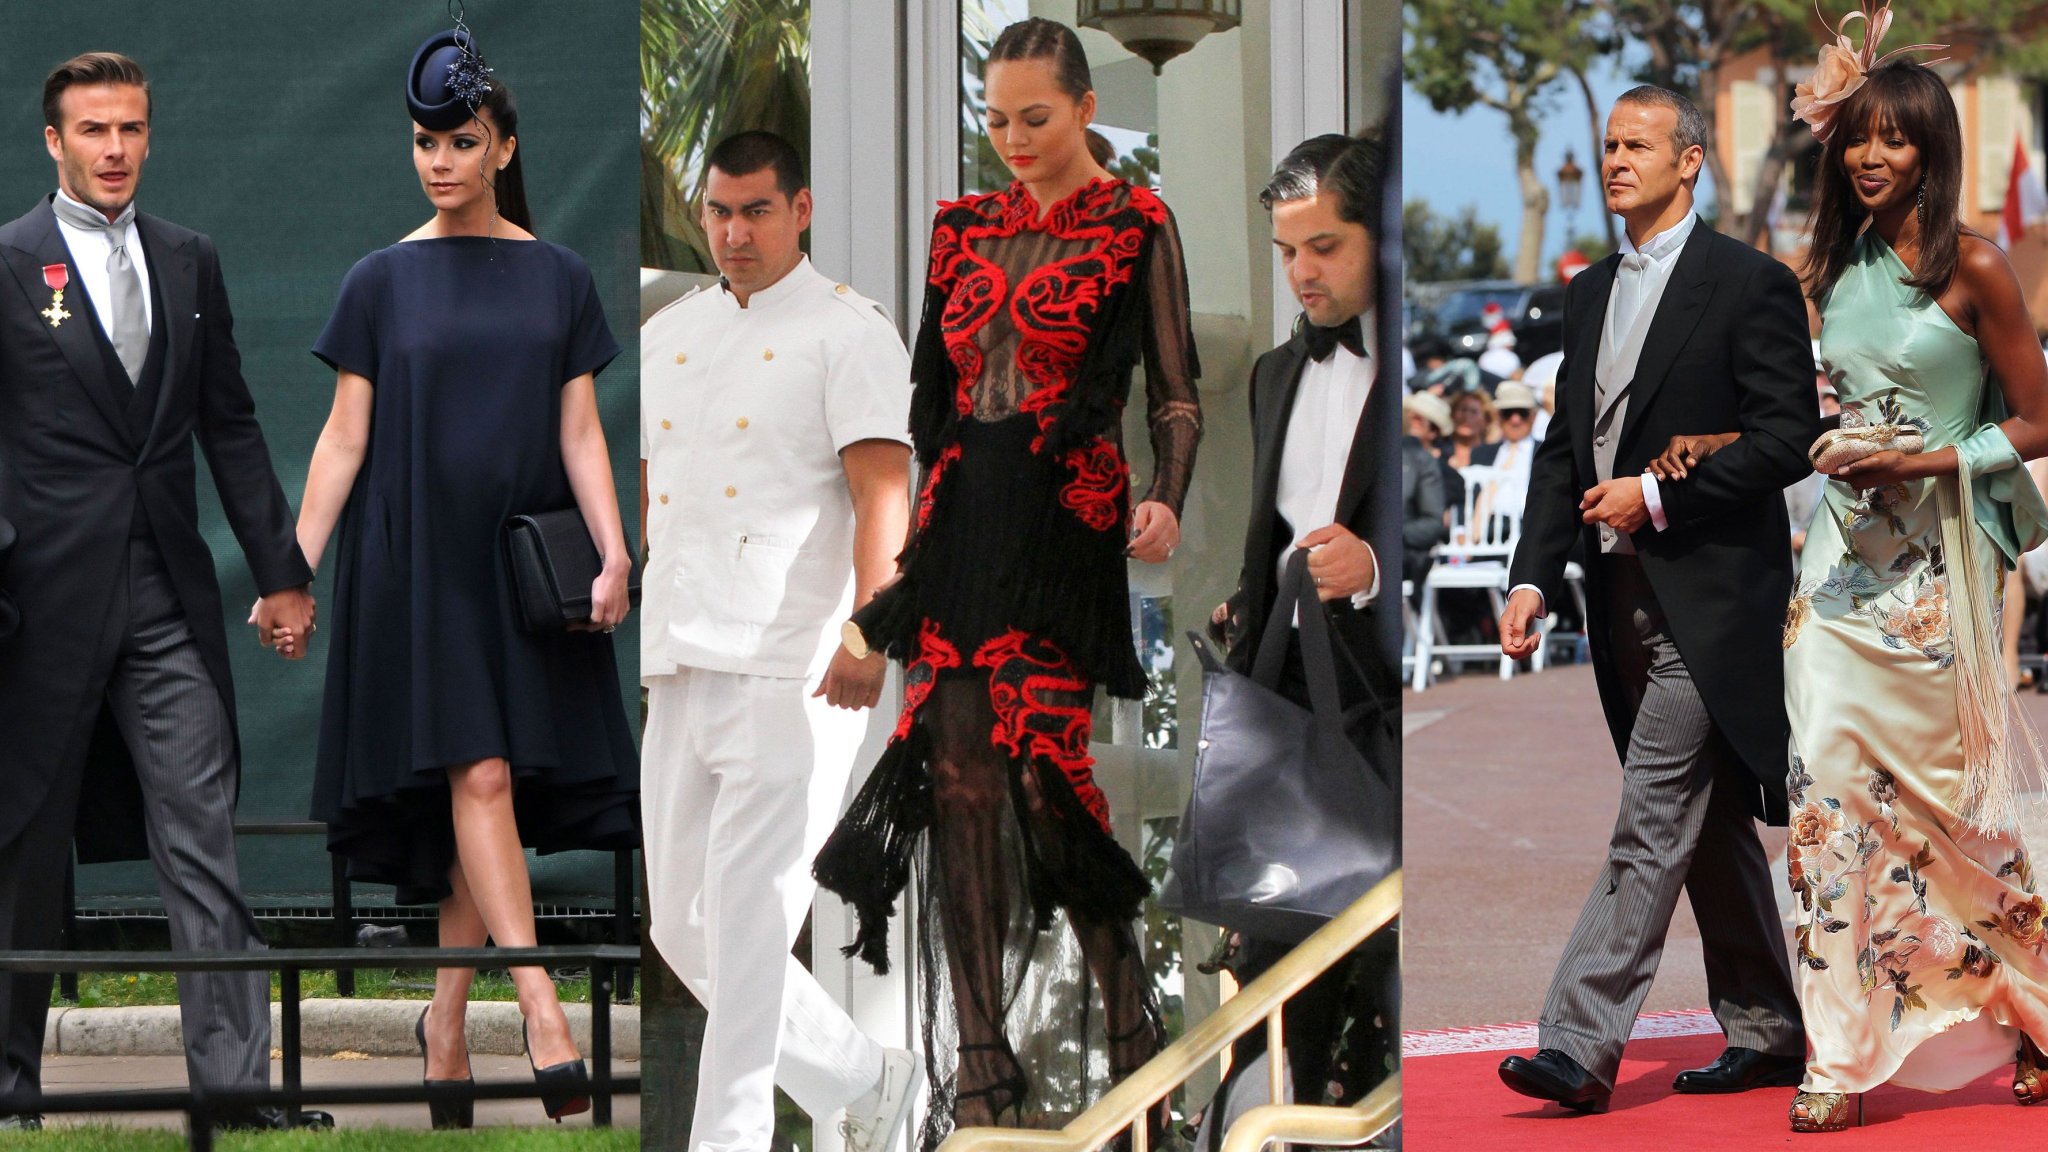 The Outfits 31 Celebrities Wore to Other People's Weddings